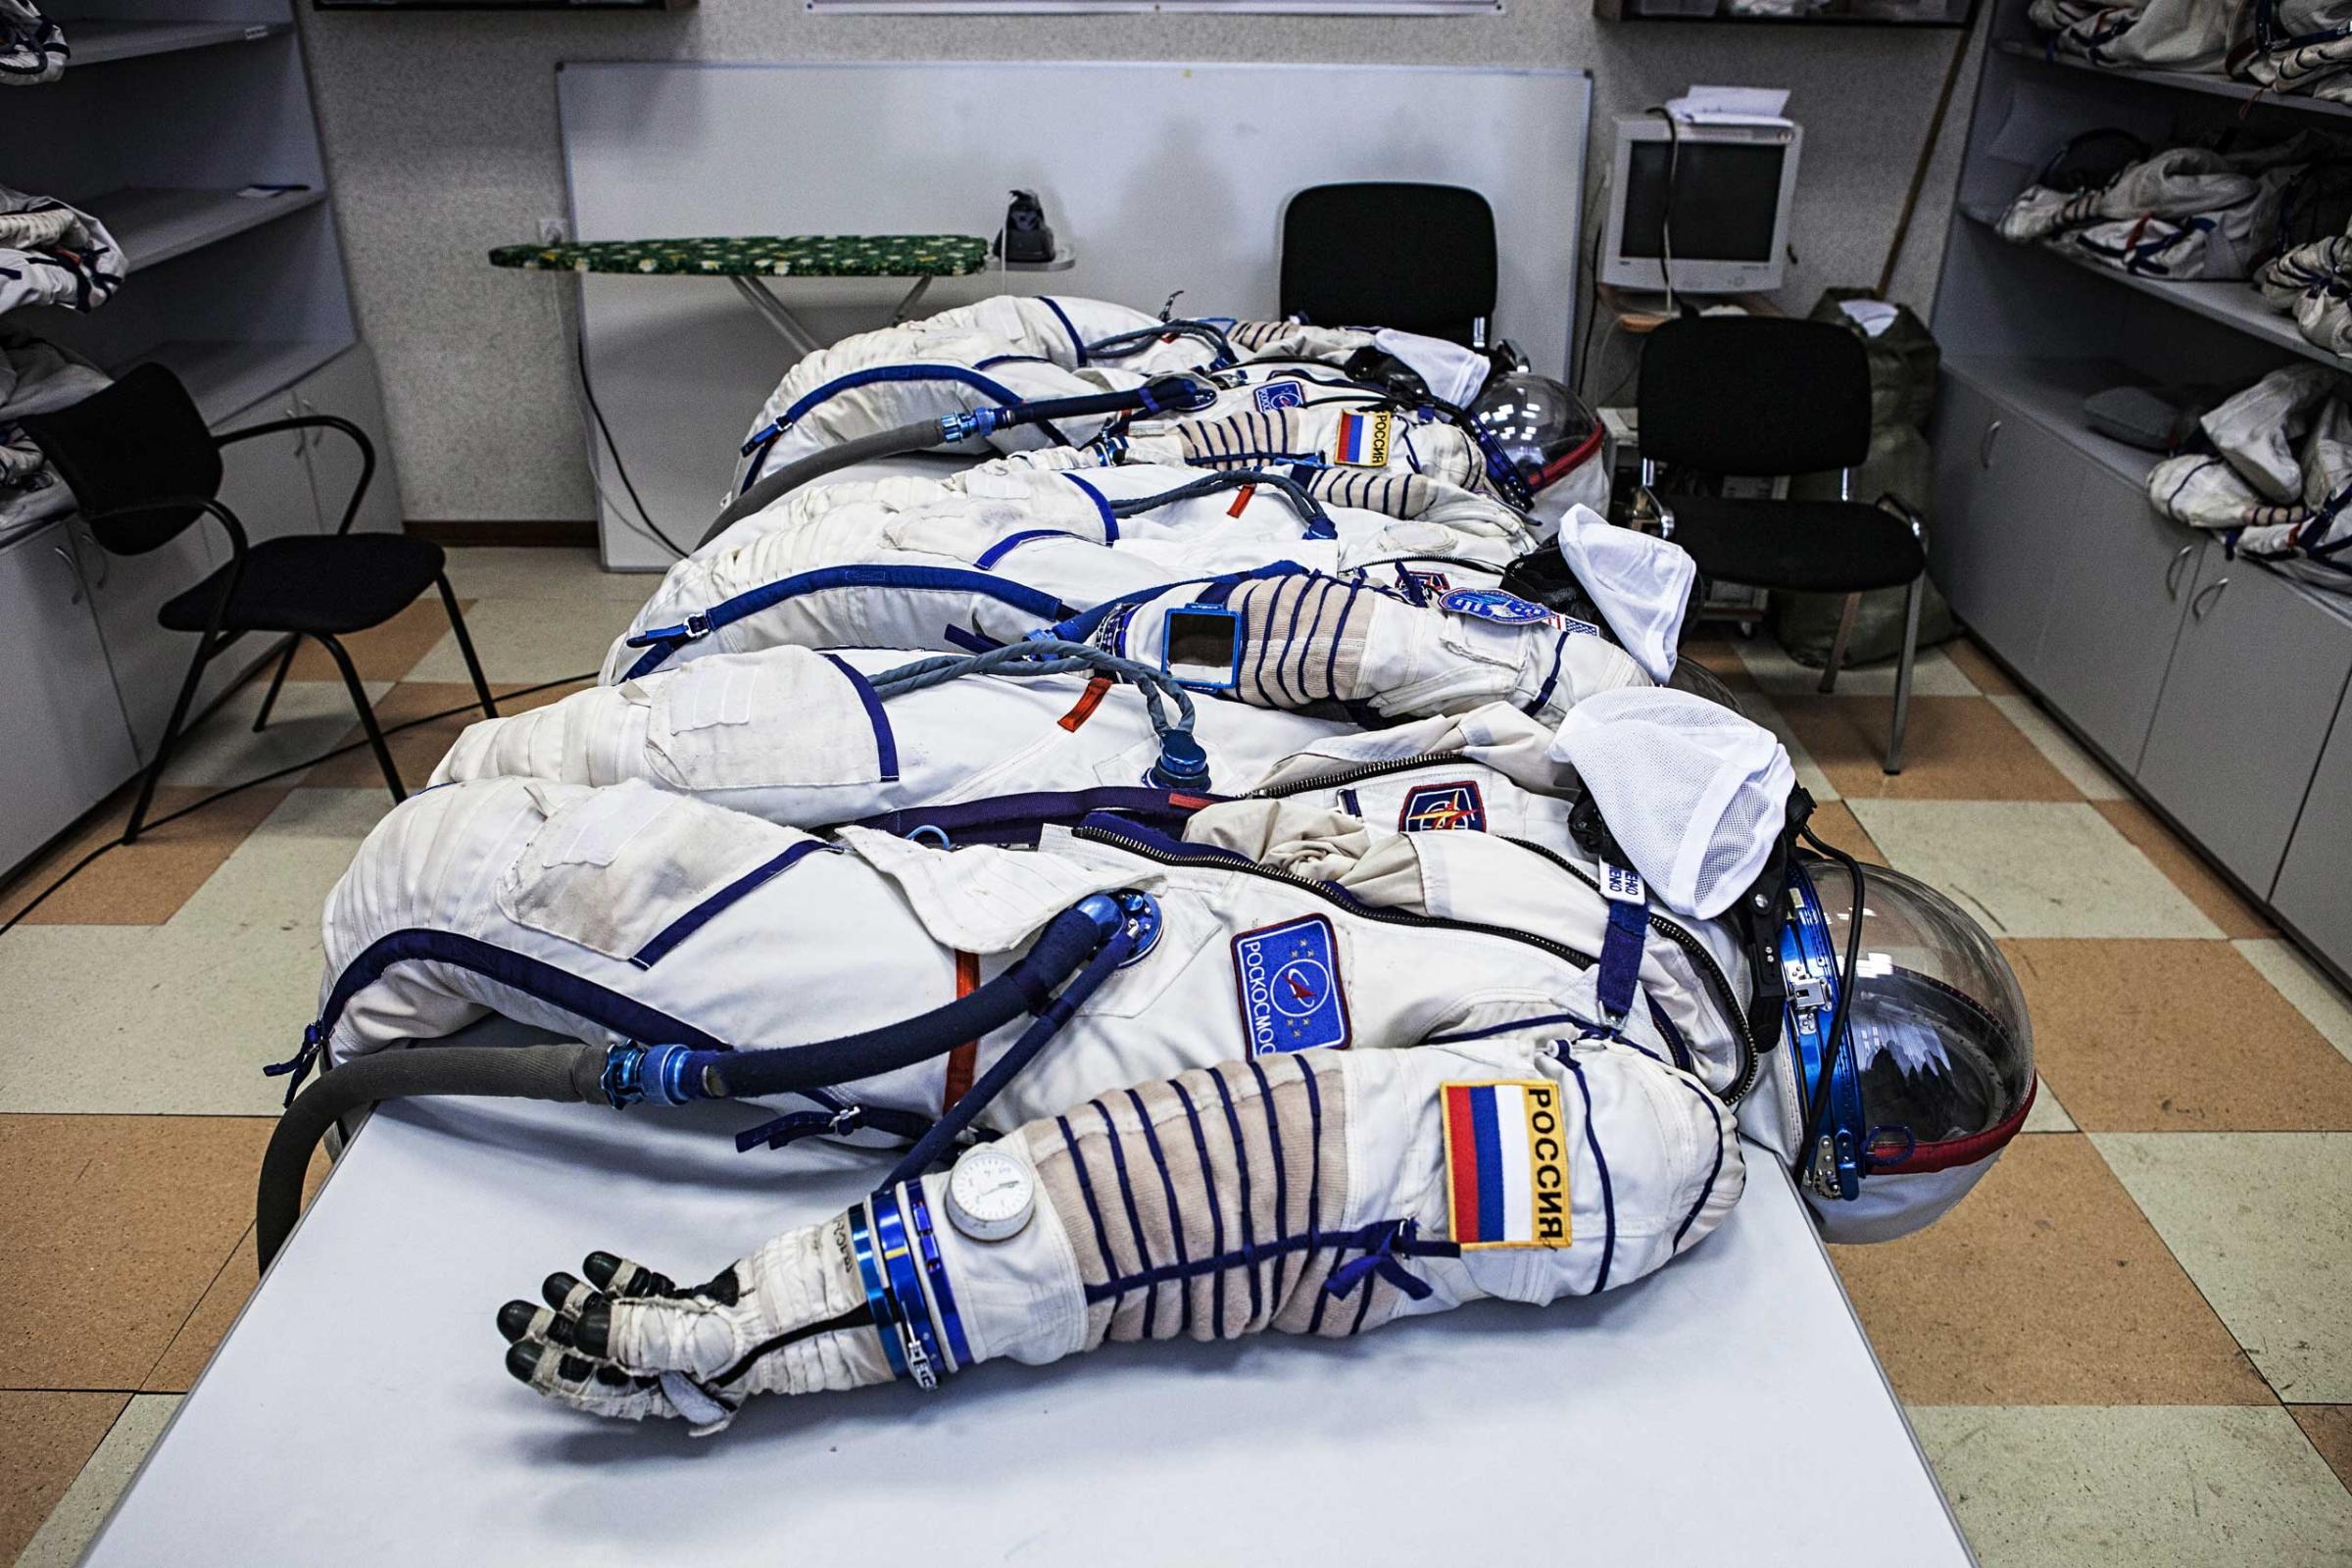 Russian Sokol suits, used for launch into orbit and reentry from space, are seen at the Yuri Gagarin Cosmonaut Training Center in Star City, Russia on March 5, 2015.